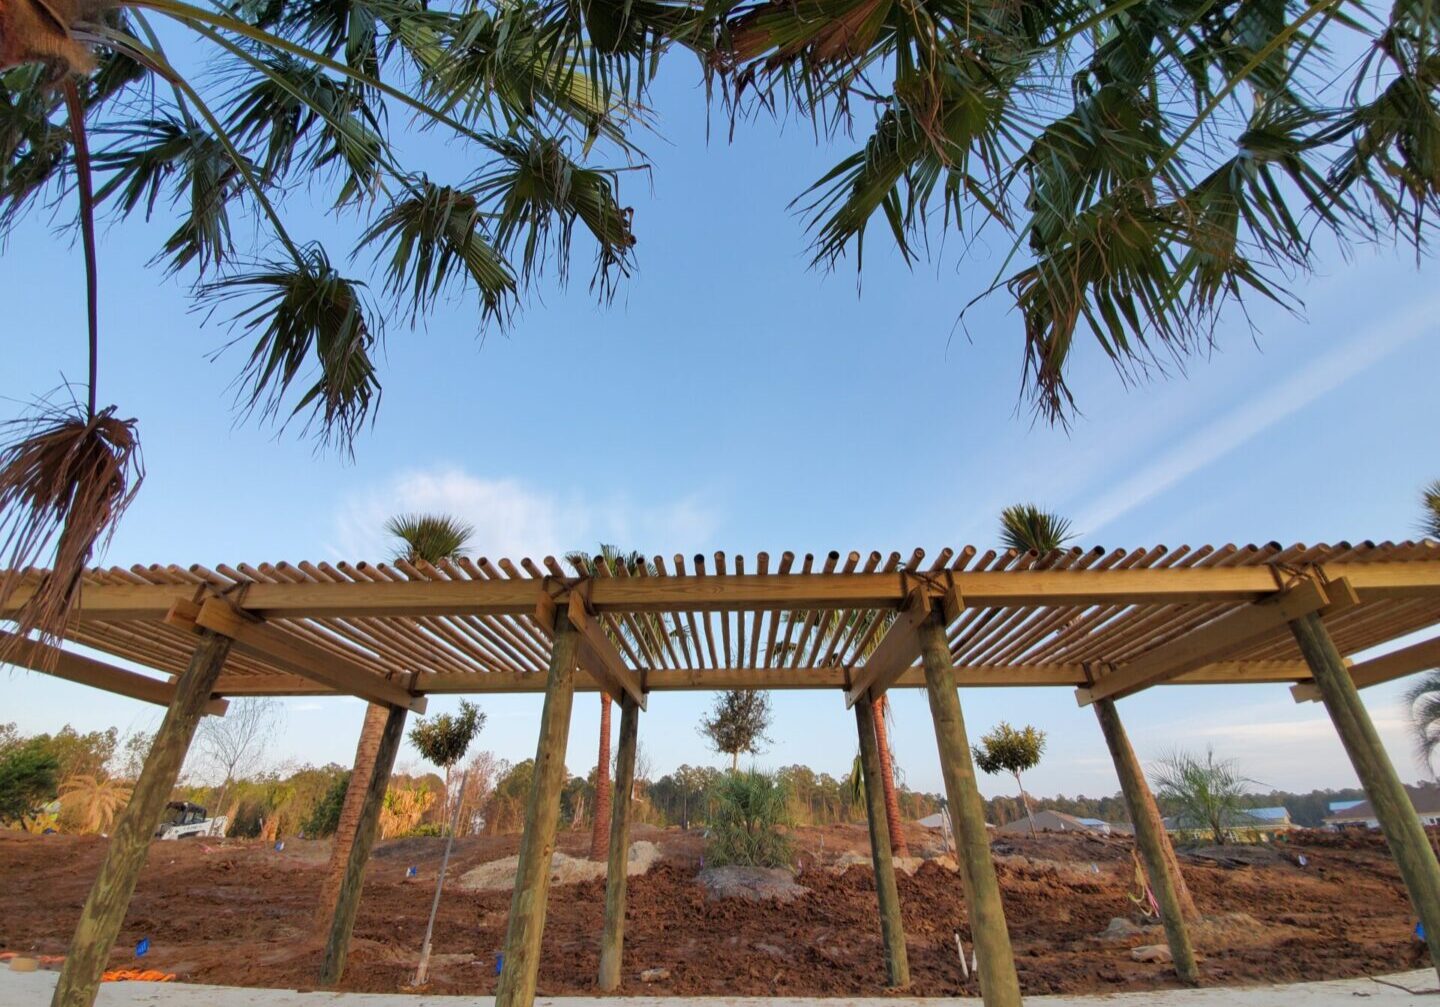 A palm tree in the middle of a wooden structure.